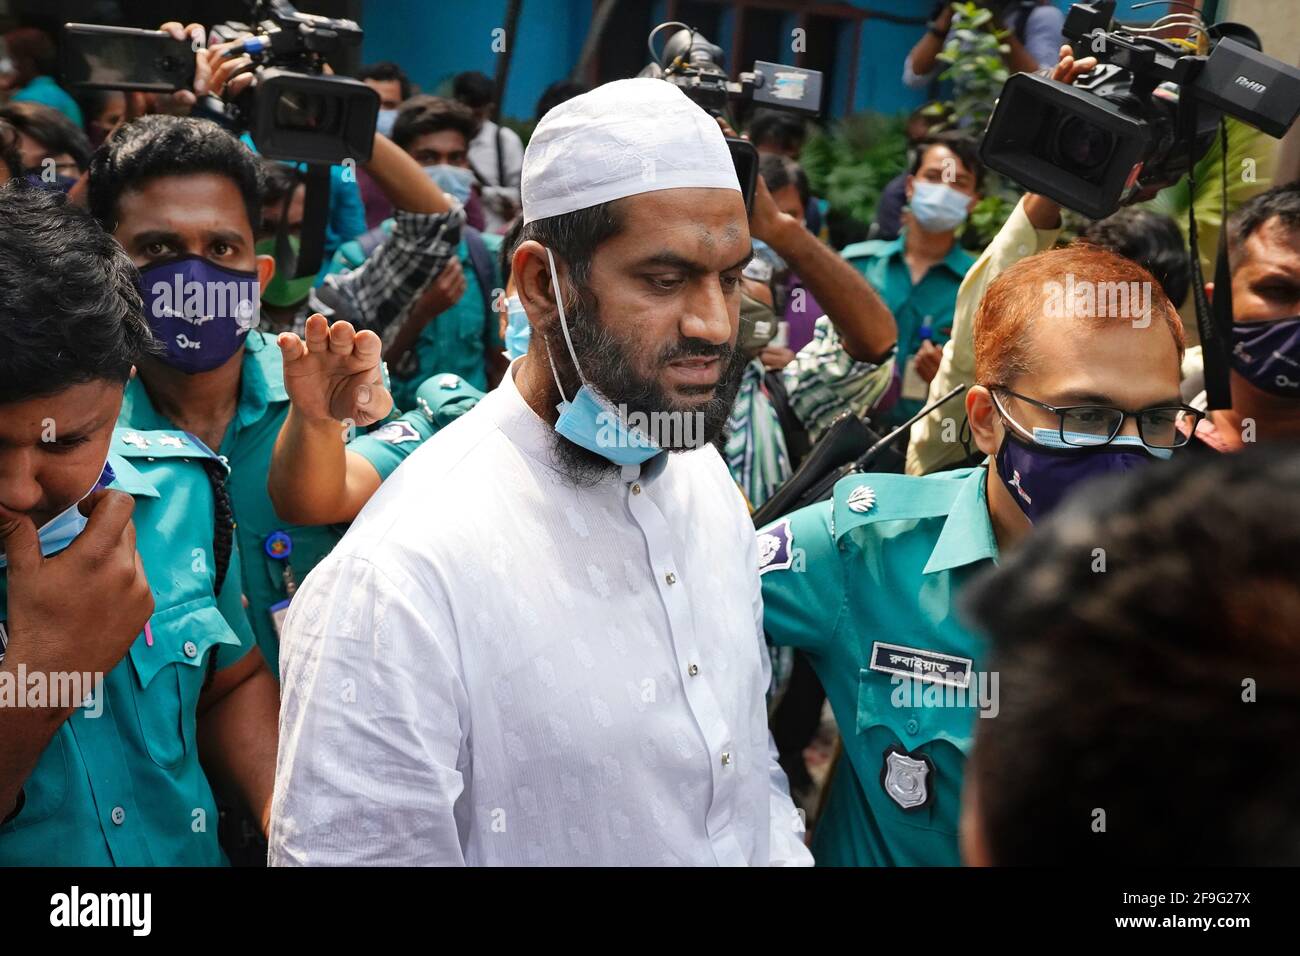 Dhaka, Bangladesh. 18th Apr, 2021. Police officers escort Mamunul Haque, a joint secretary of hardline Islamist group Hefazat-e-Islam, following his arrest in Dhaka.Joint teams of police and detectives raided Jamia Rahmania Arabia Madrasa in Dhaka today and apprehended the Hefazat leader, who has been in the limelight due to some recent controversies. (Photo by Sultan Mahmud Mukut/SOPA Images/Sipa USA) Credit: Sipa USA/Alamy Live News Stock Photo